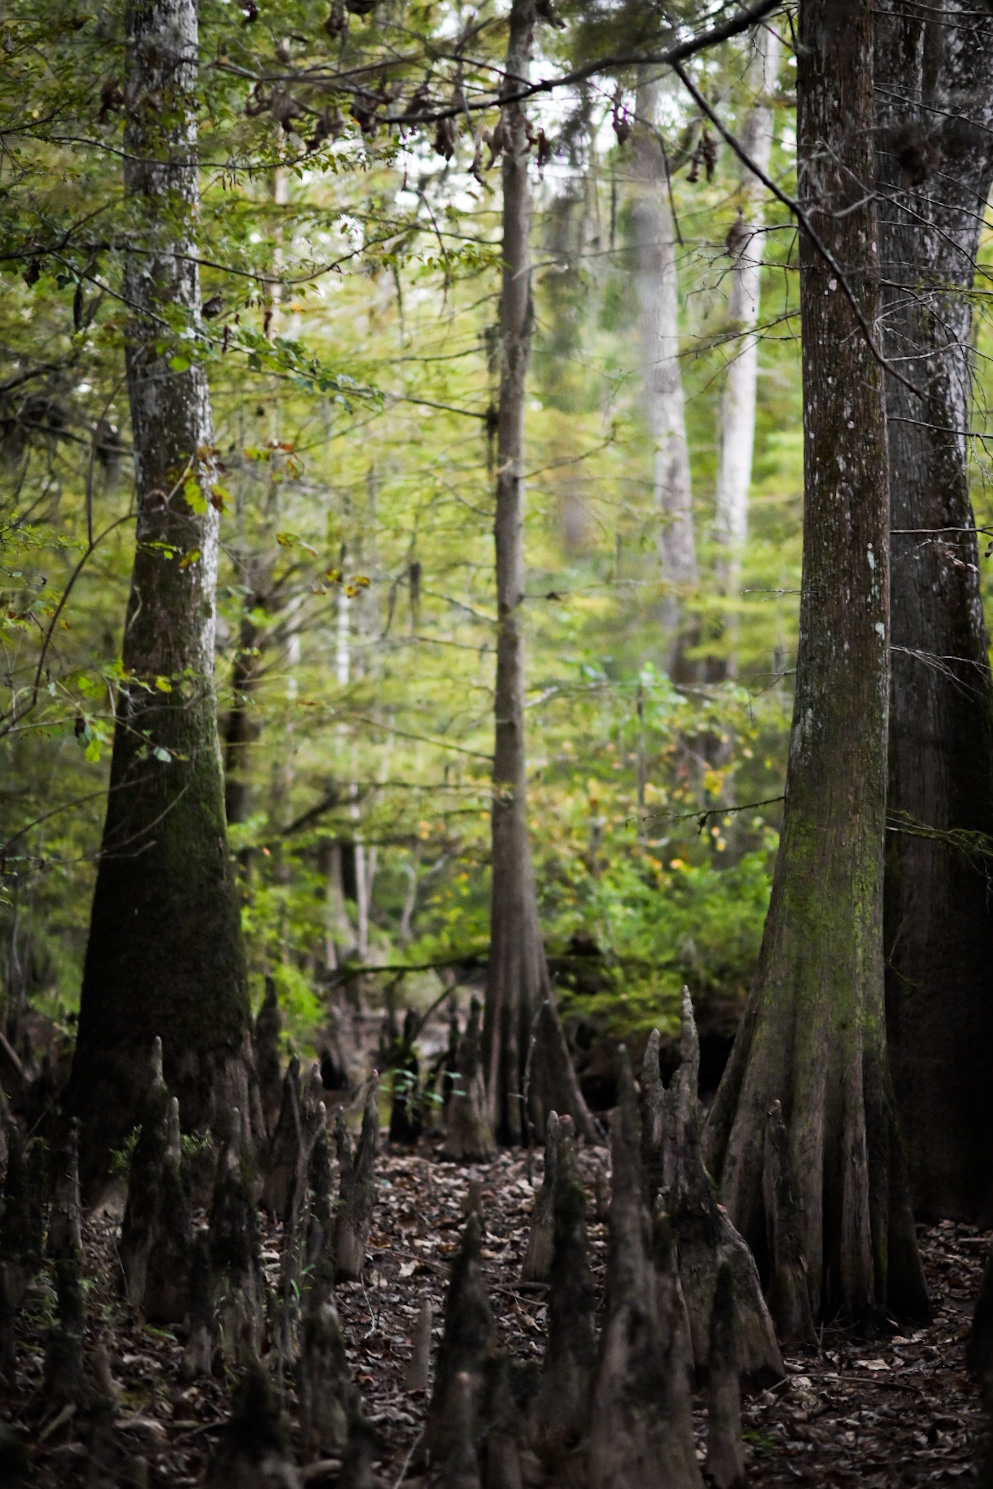 A muddy slough filled with cypress trees and stumps